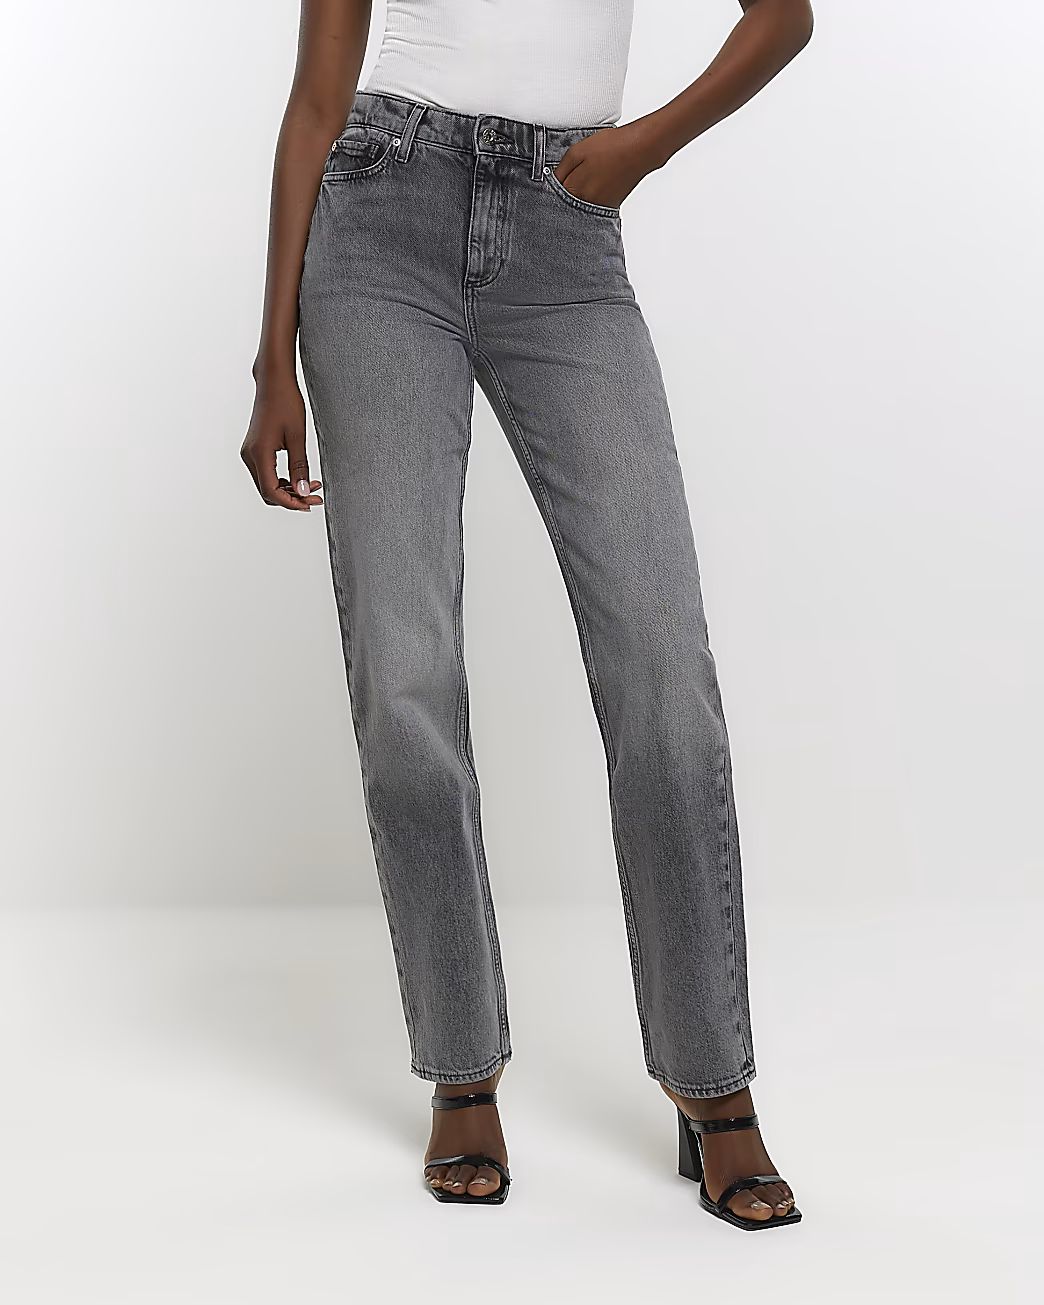 Grey faded high waisted stove straight jeans | River Island (UK & IE)